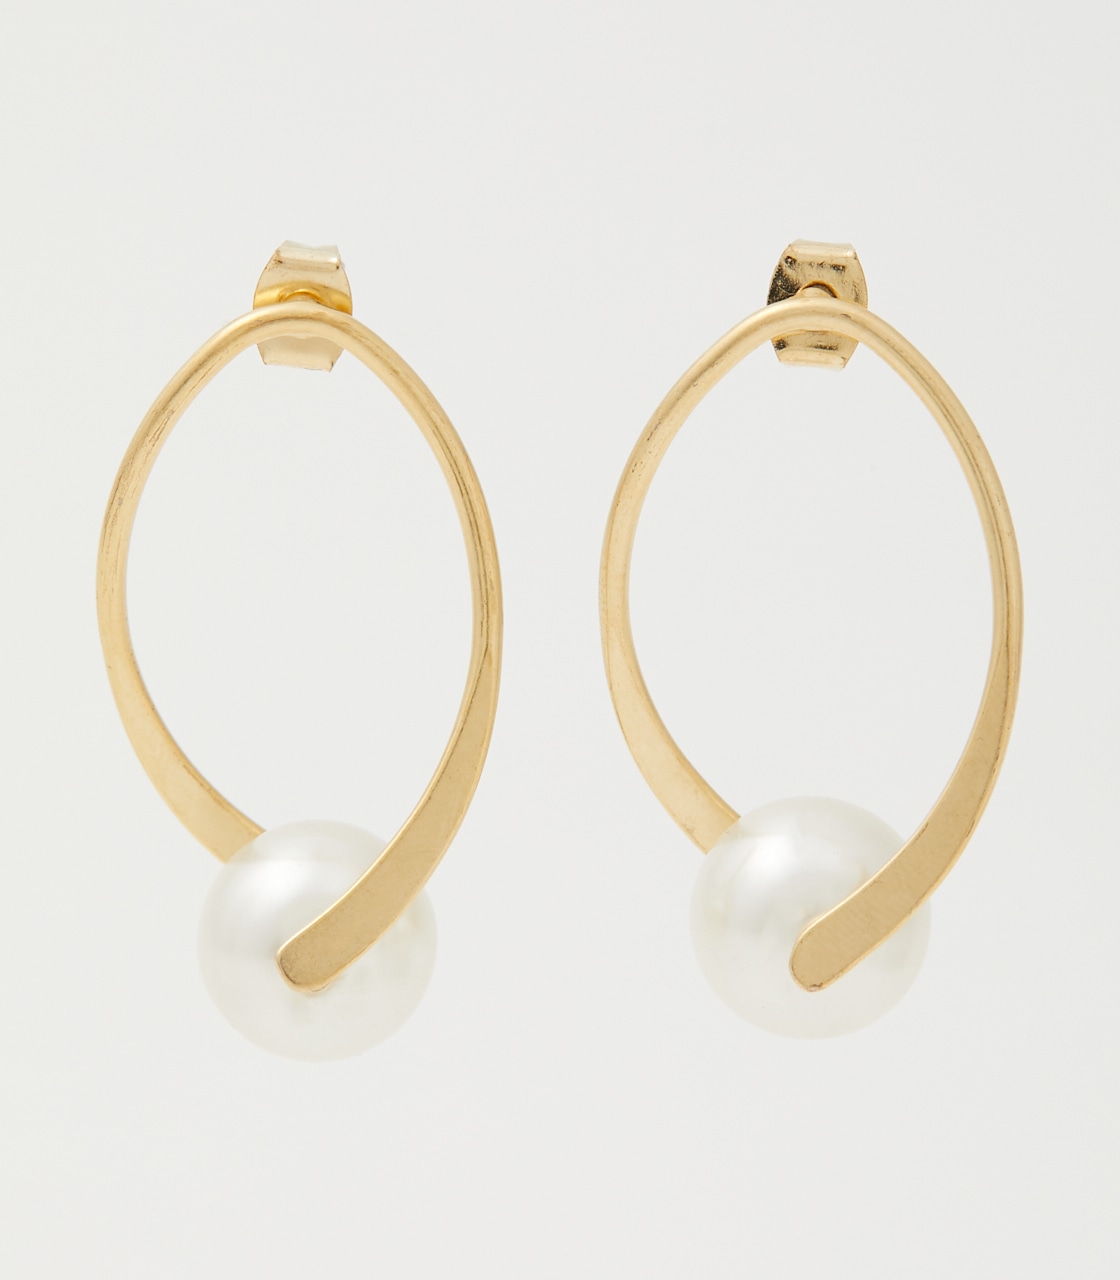 WRAPPED PEARL EARRINGS/ラップパールピアス 詳細画像 L/GLD 1